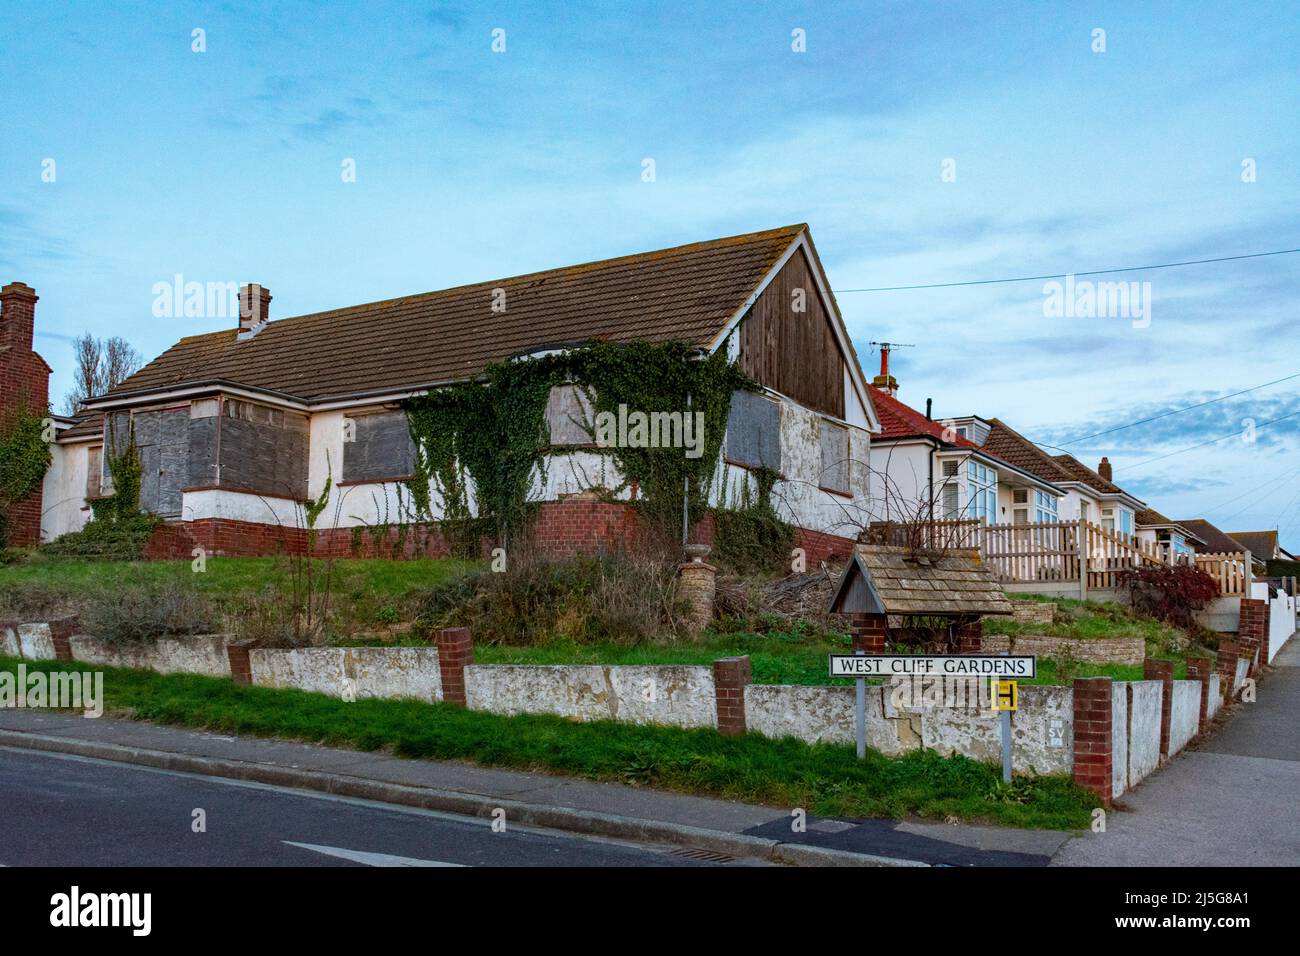 A derelict and abandoned house at the end of Westcliff Gardens, Herne Bay, Kent, UK. Stock Photo